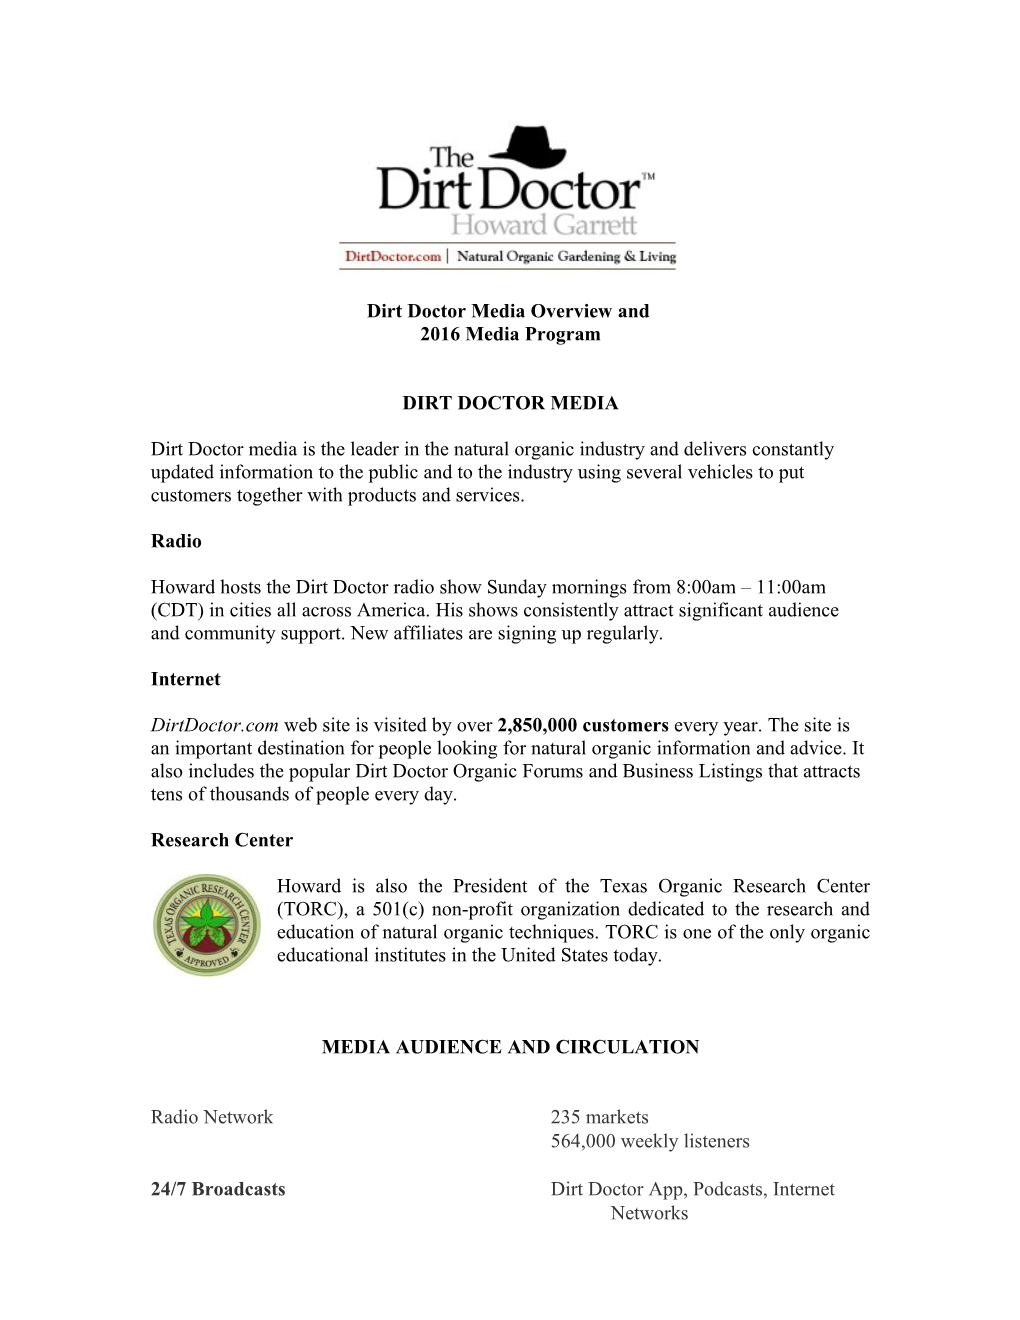 Dirt Doctor Media Overview And